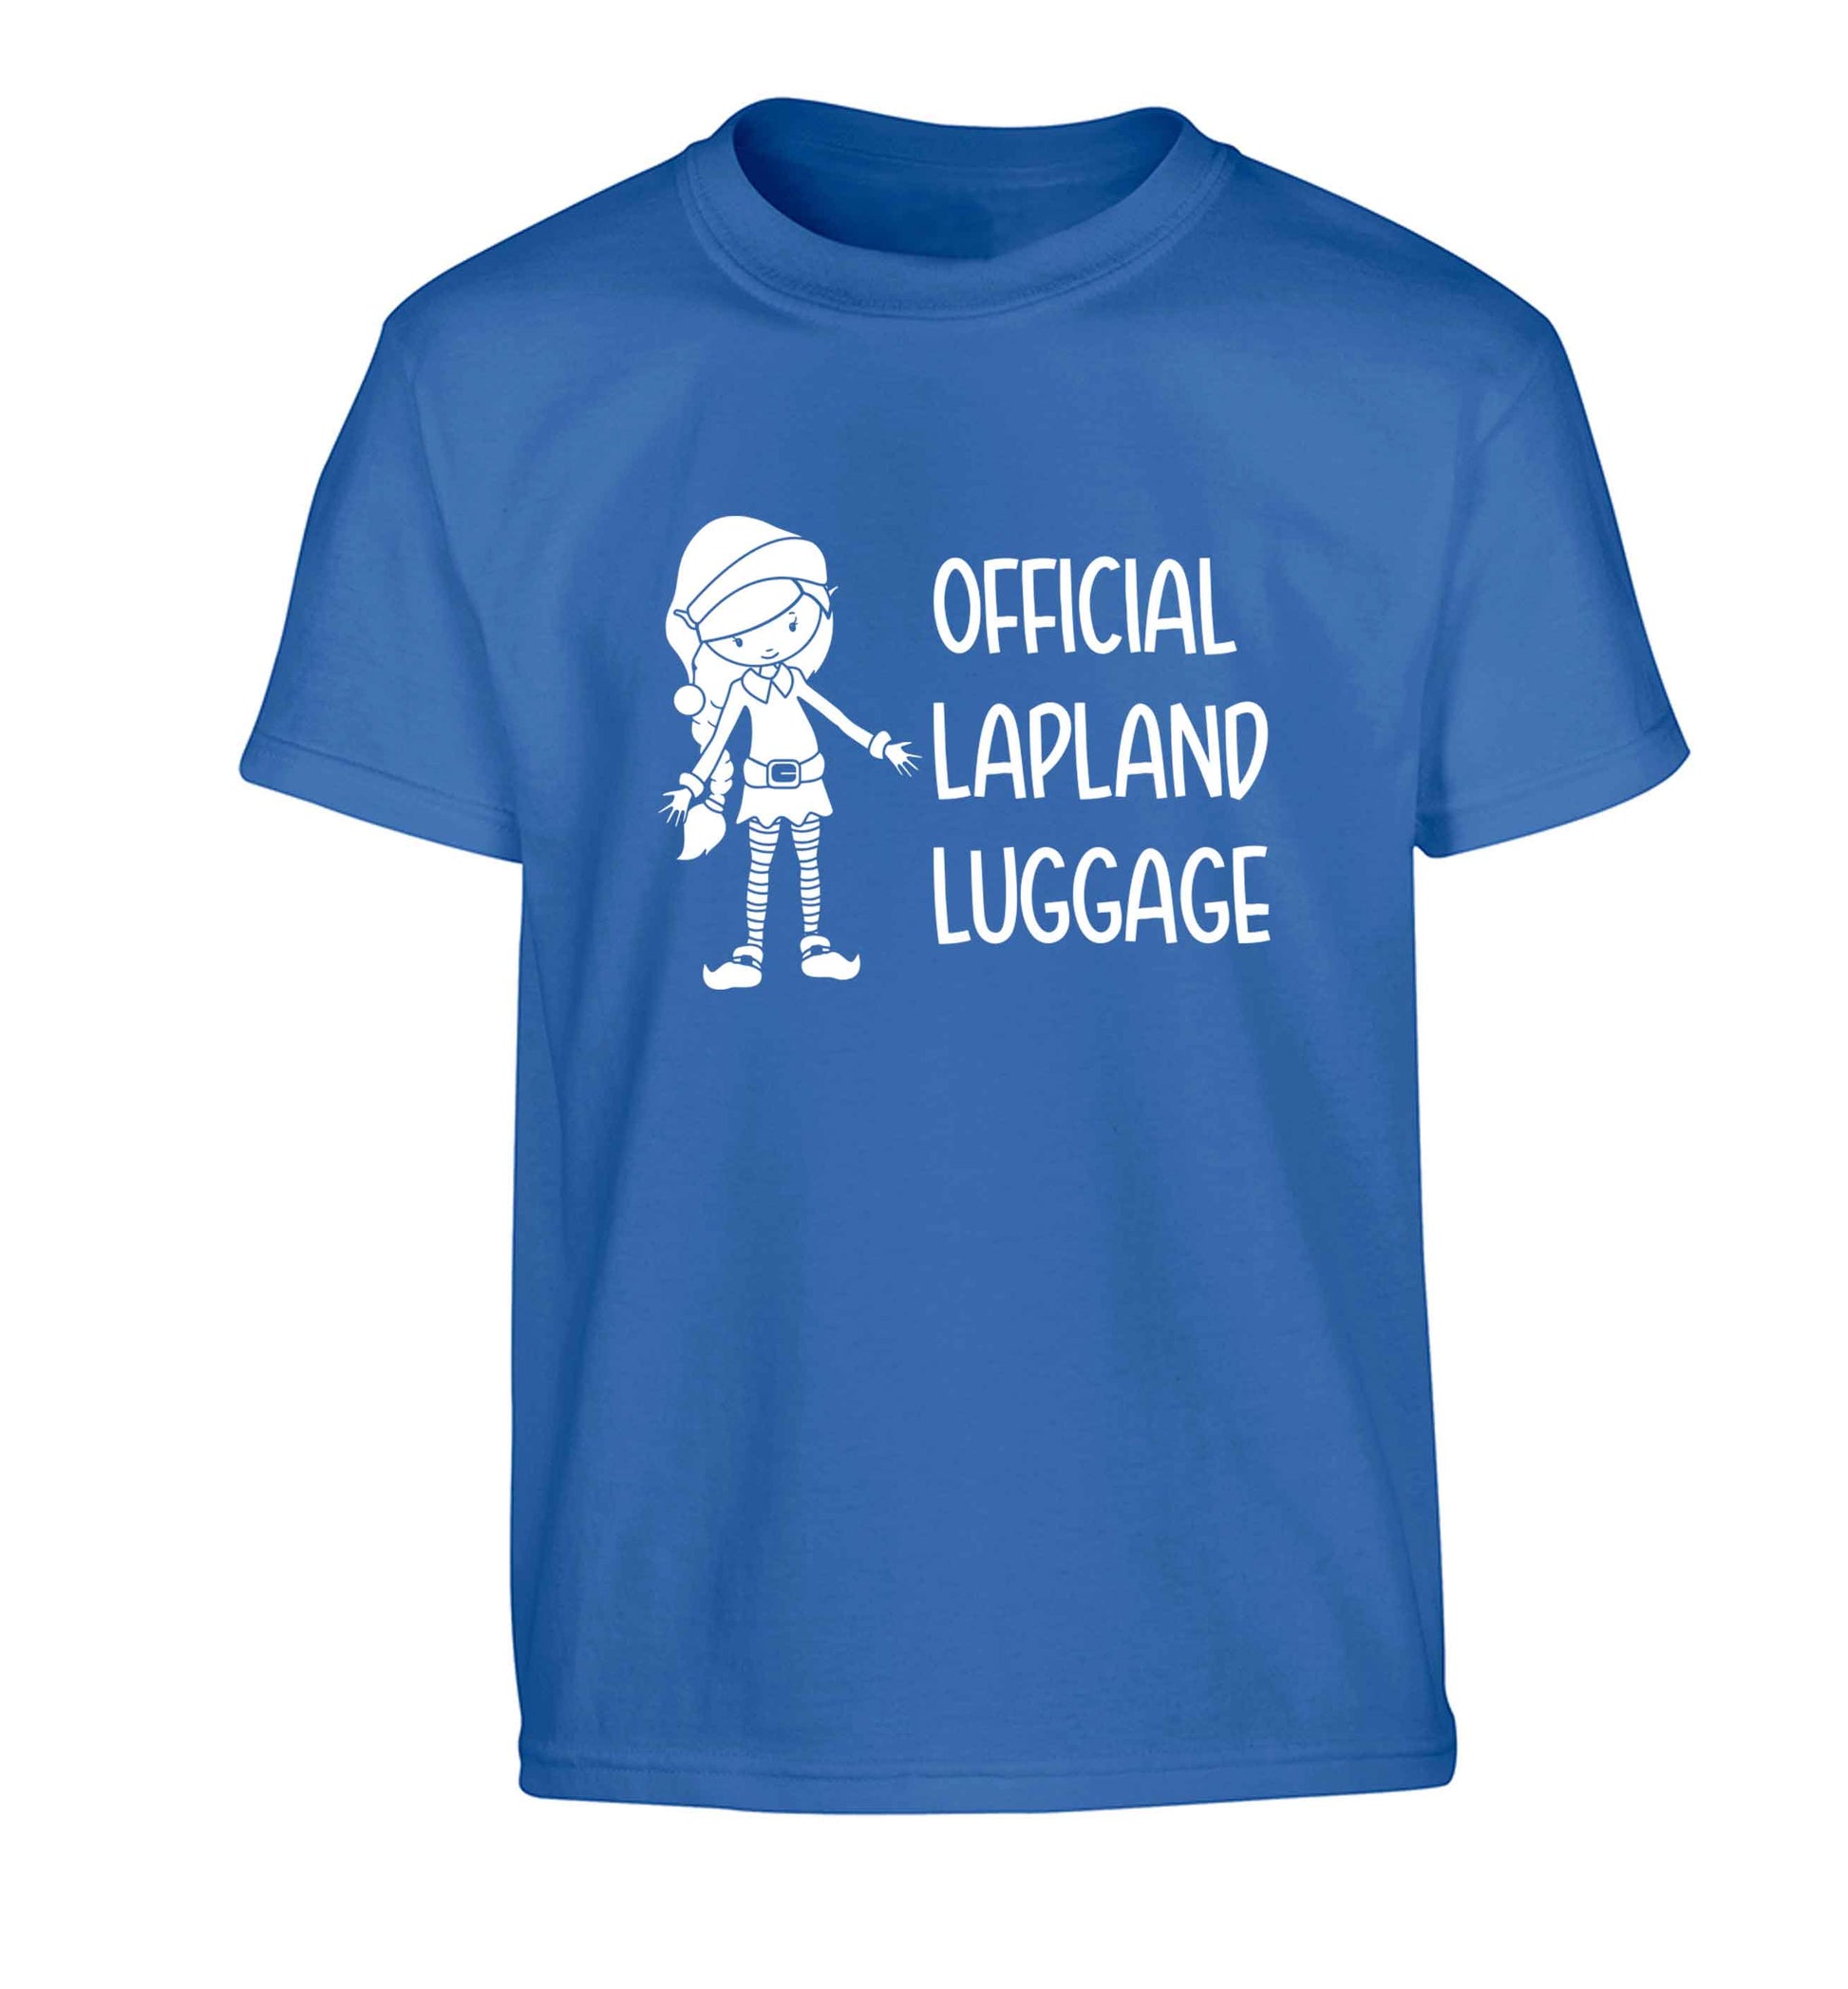 Official lapland luggage - Elf snowflake Children's blue Tshirt 12-13 Years